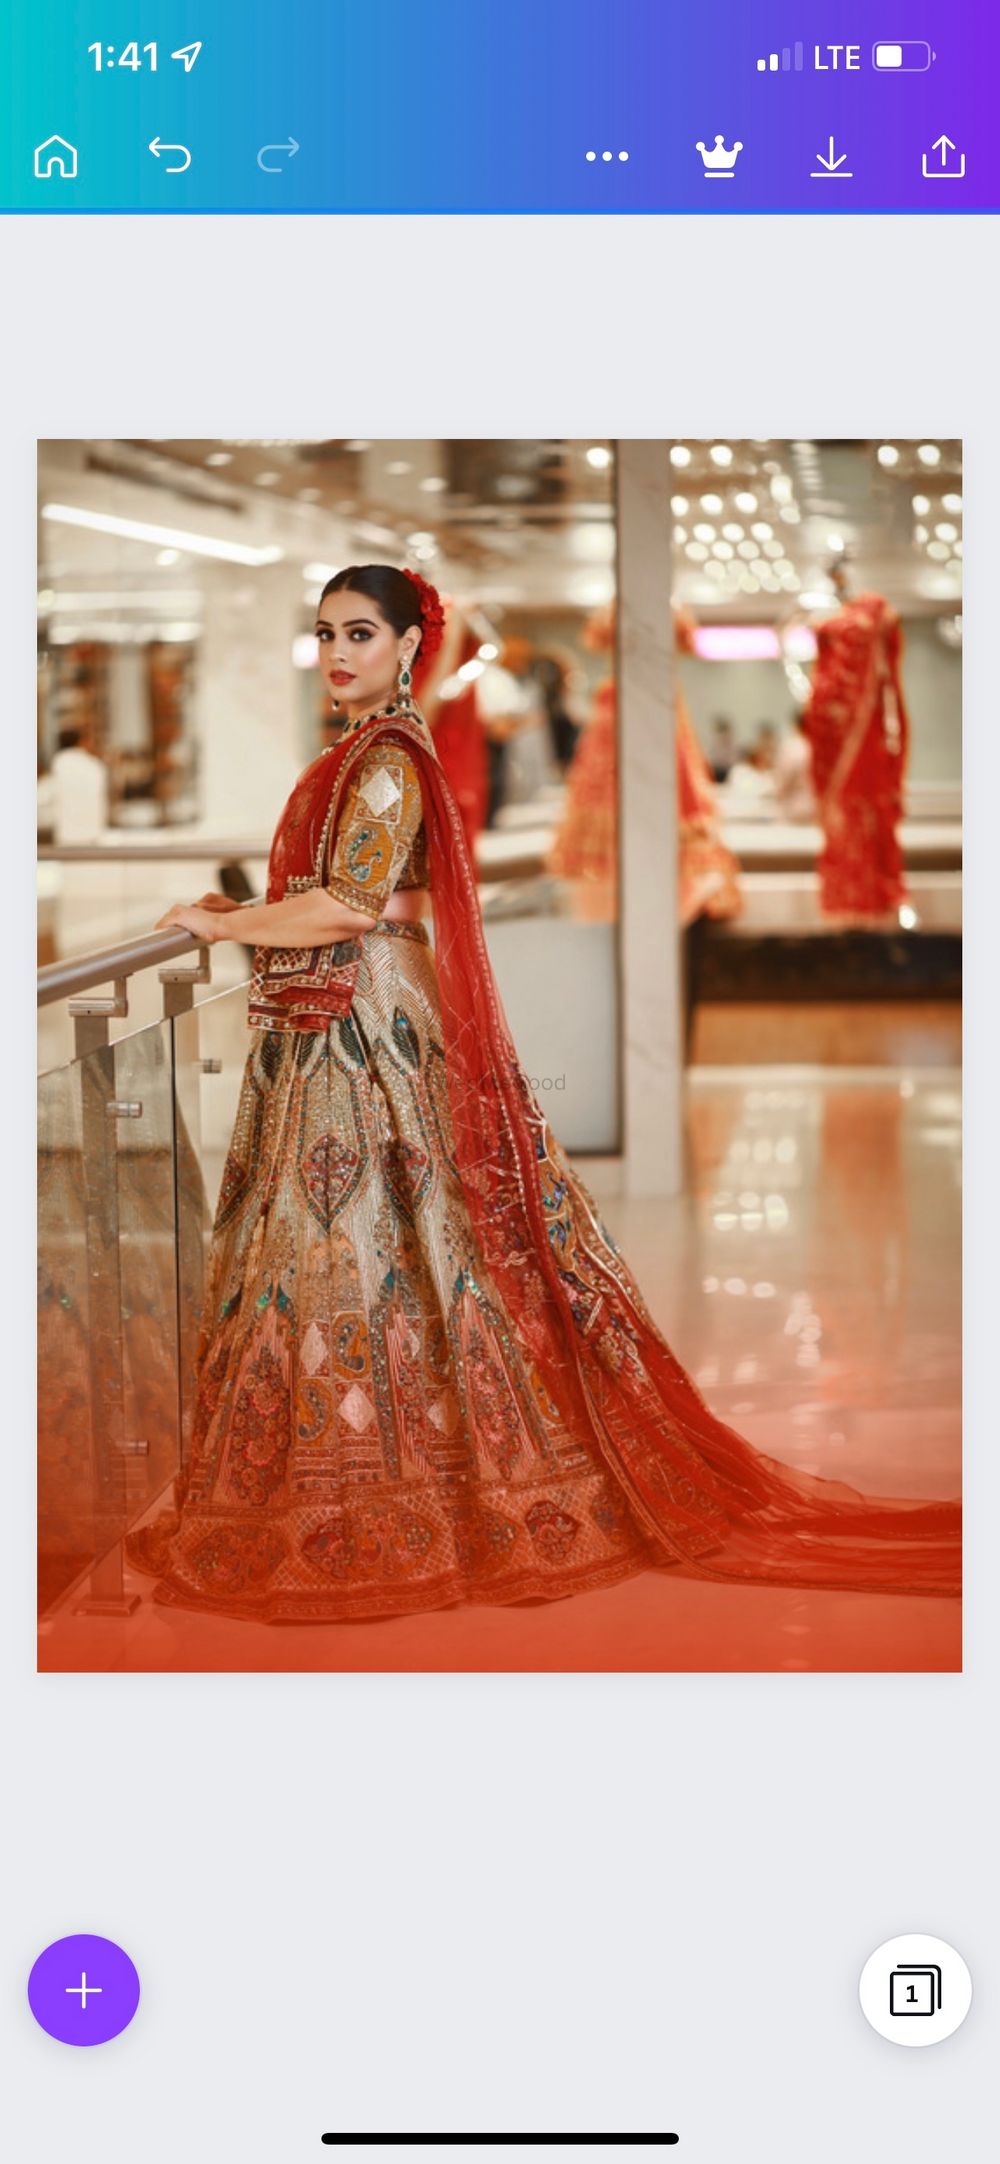 Photo From Signature Bridal Look - By Facestories by Samridhi